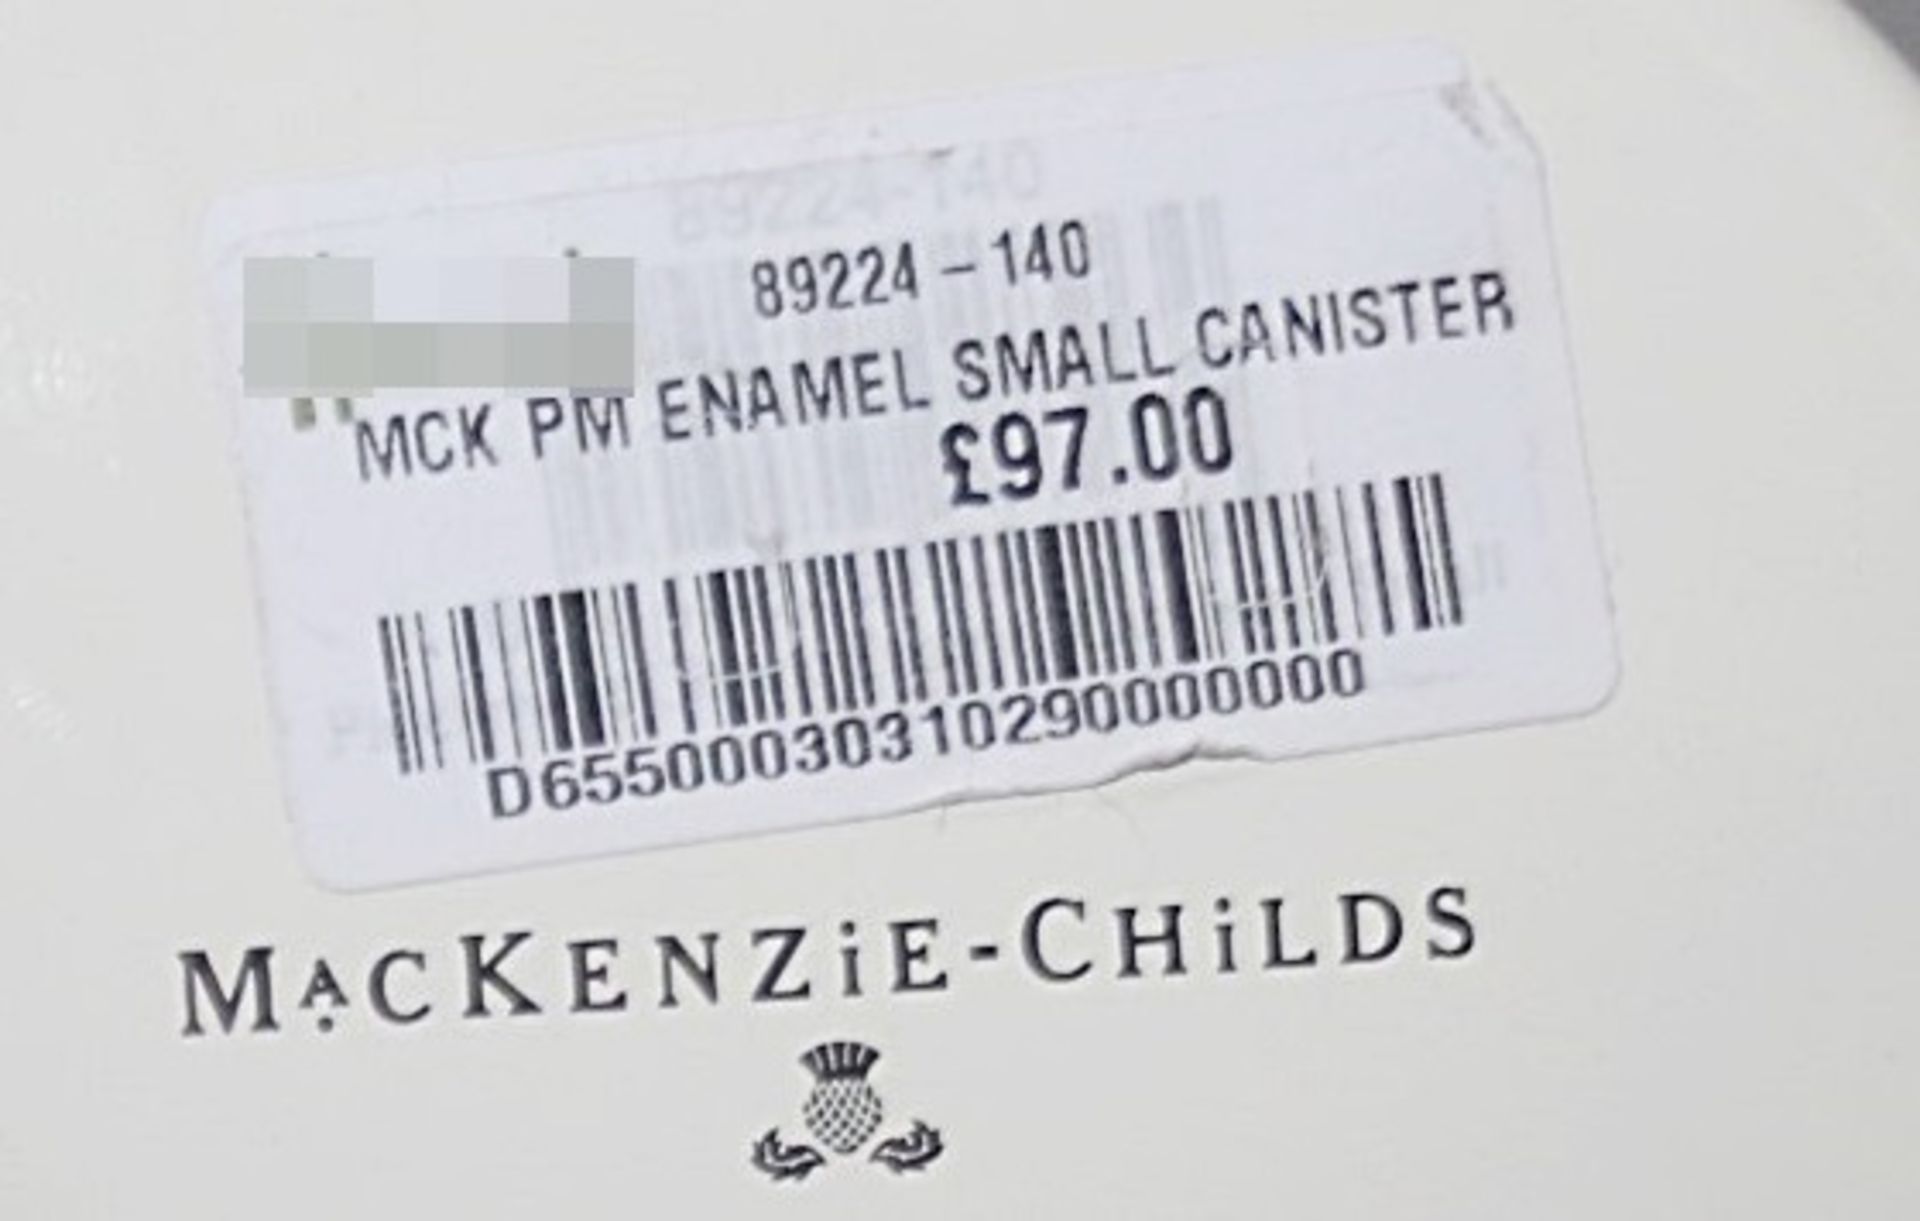 1 x MACKENZIE-CHILDS Small Parchment Check Enamel Canister - Original Price £97.00 - Ref: HAR280/ - Image 5 of 9